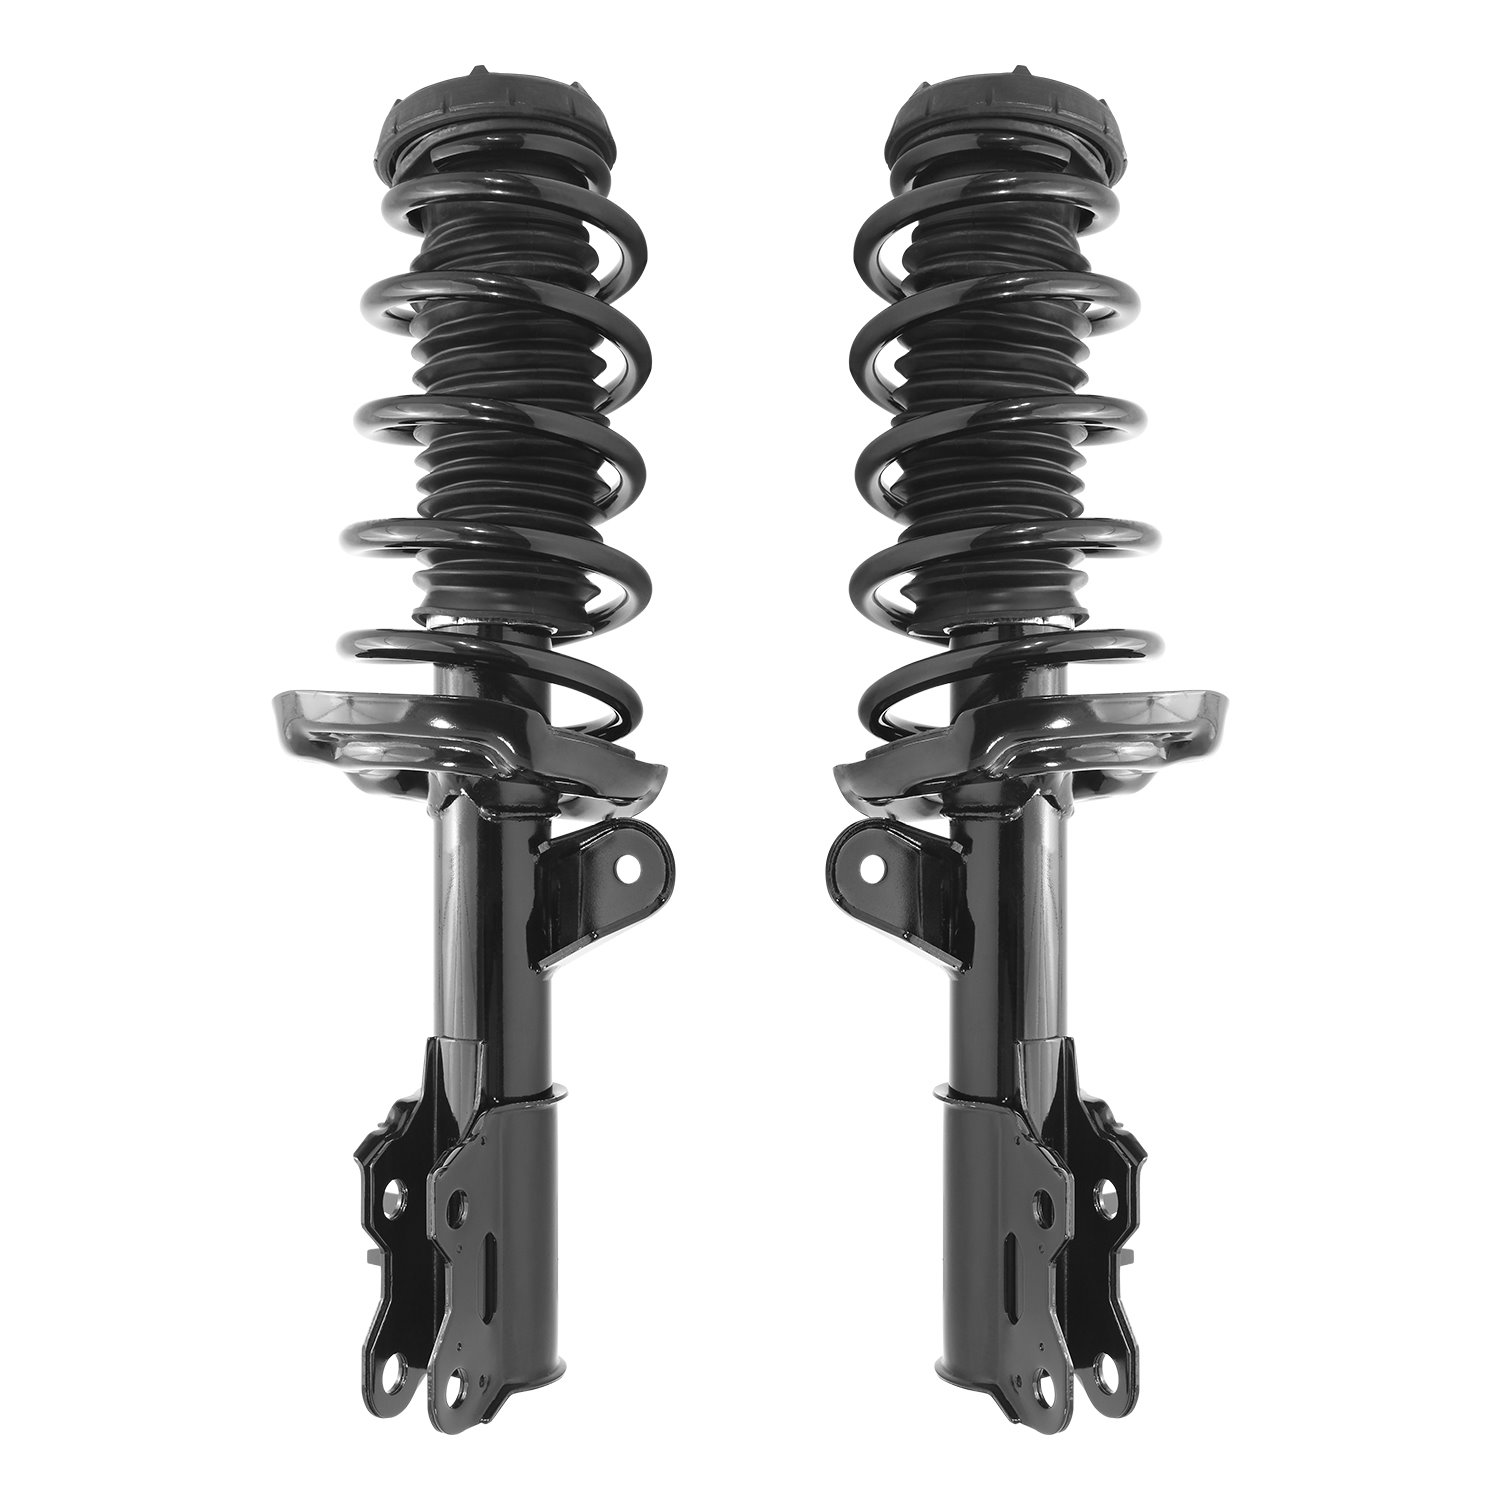 2-11717-11718-001 Suspension Strut & Coil Spring Assembly Set Fits Select Buick Encore, Chevy Trax